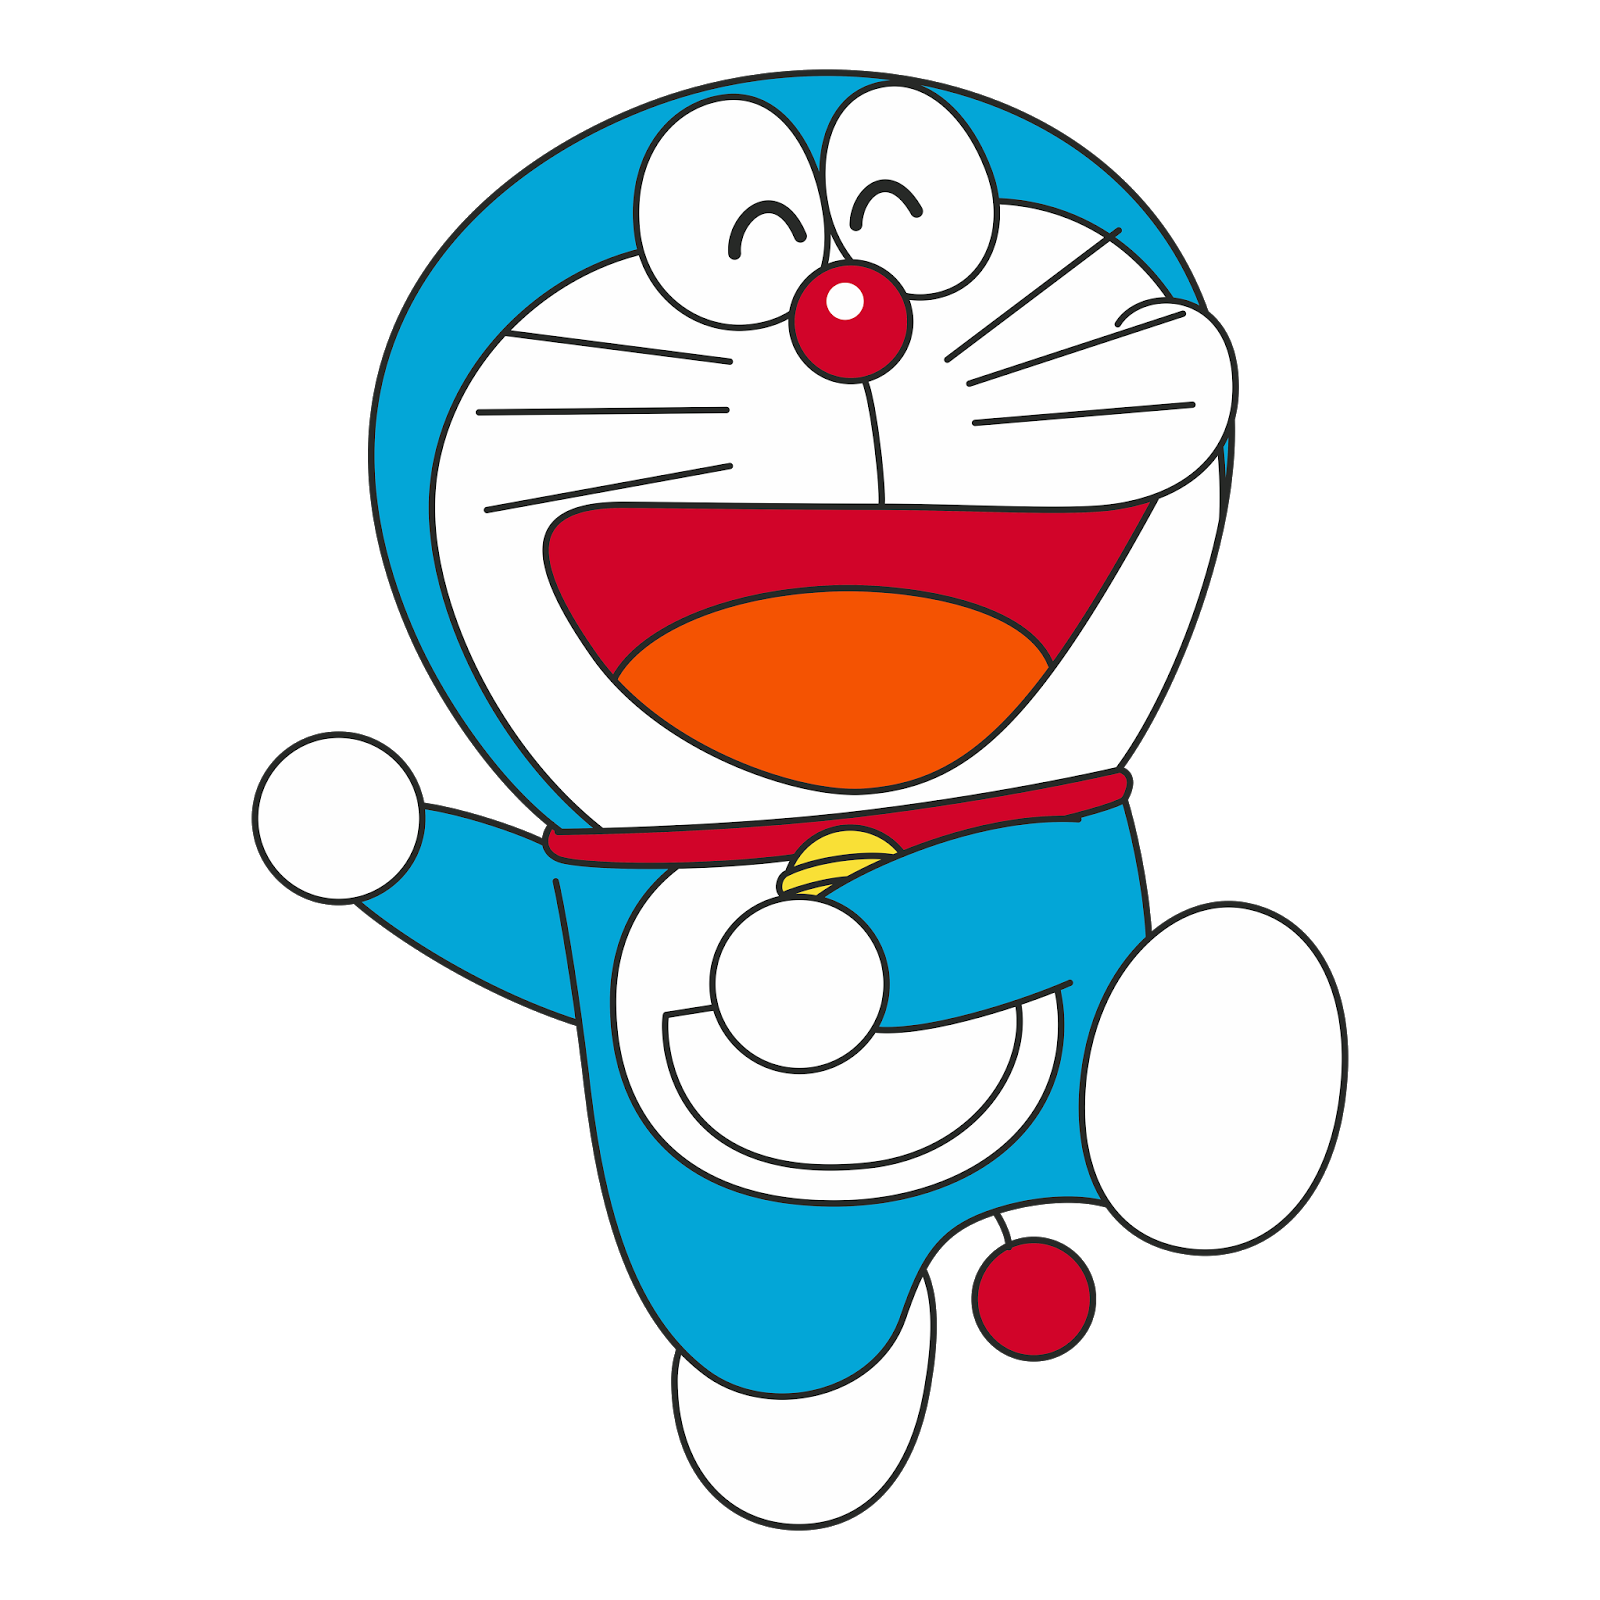 Character Doraemon Transparent Cartoon Free Cliparts And Silhouettes